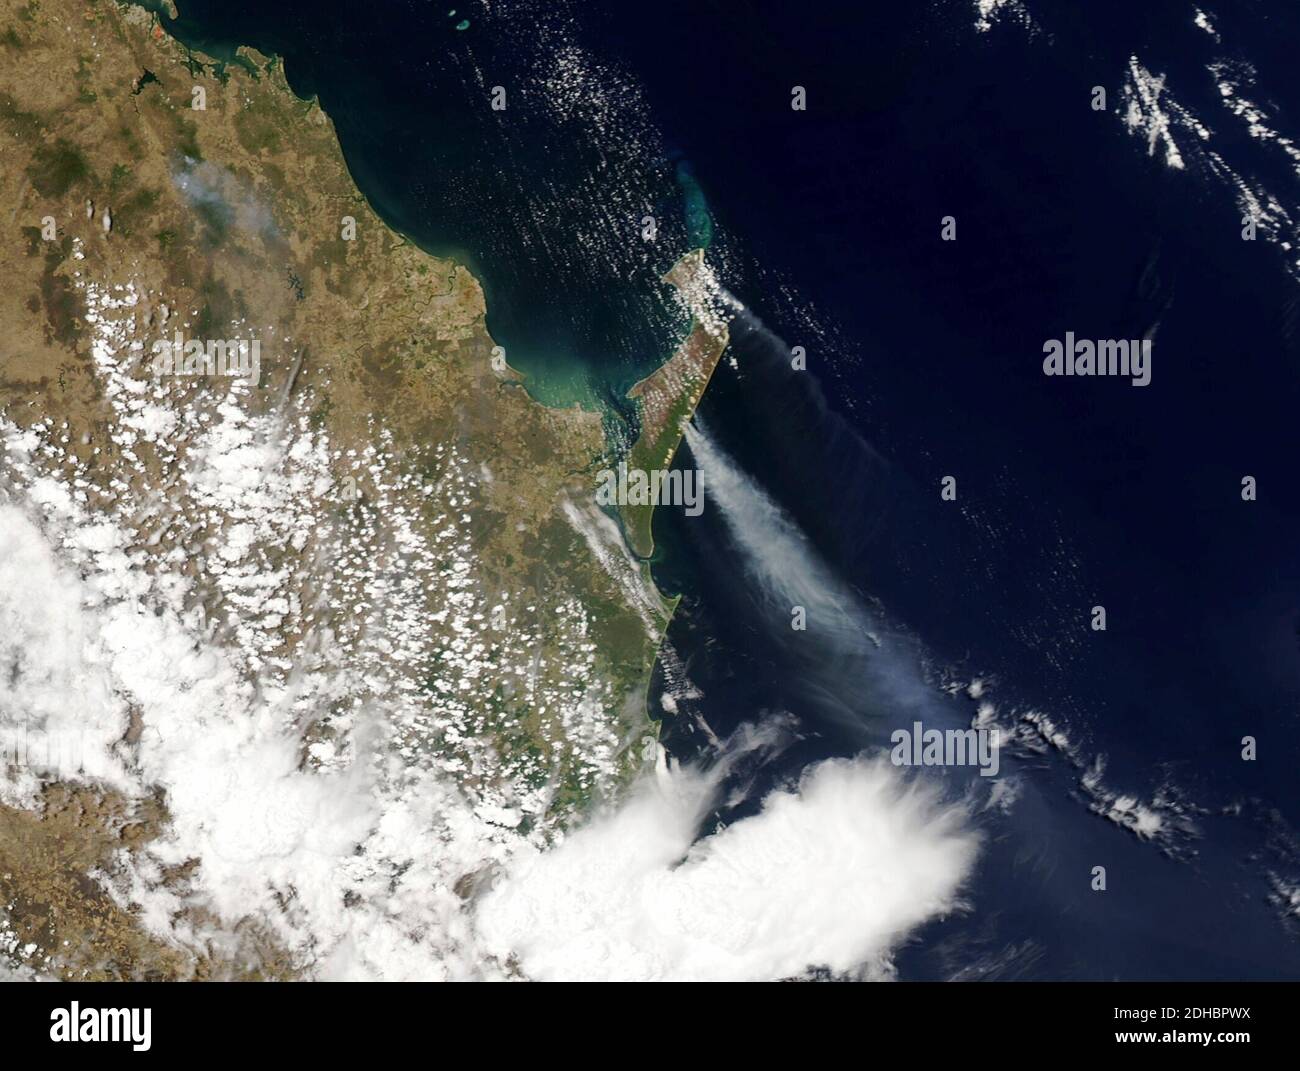 Smoke plumes rise from the eastern side of Fraser Island as observed by MODIS on board the NASA Aqua satellite December 7, 2020 on Fraser Island, Australia. An illegal campfire ignited brush and swept through the unique forests destroying half of the World Heritage Site and threatening local wildlife. Stock Photo